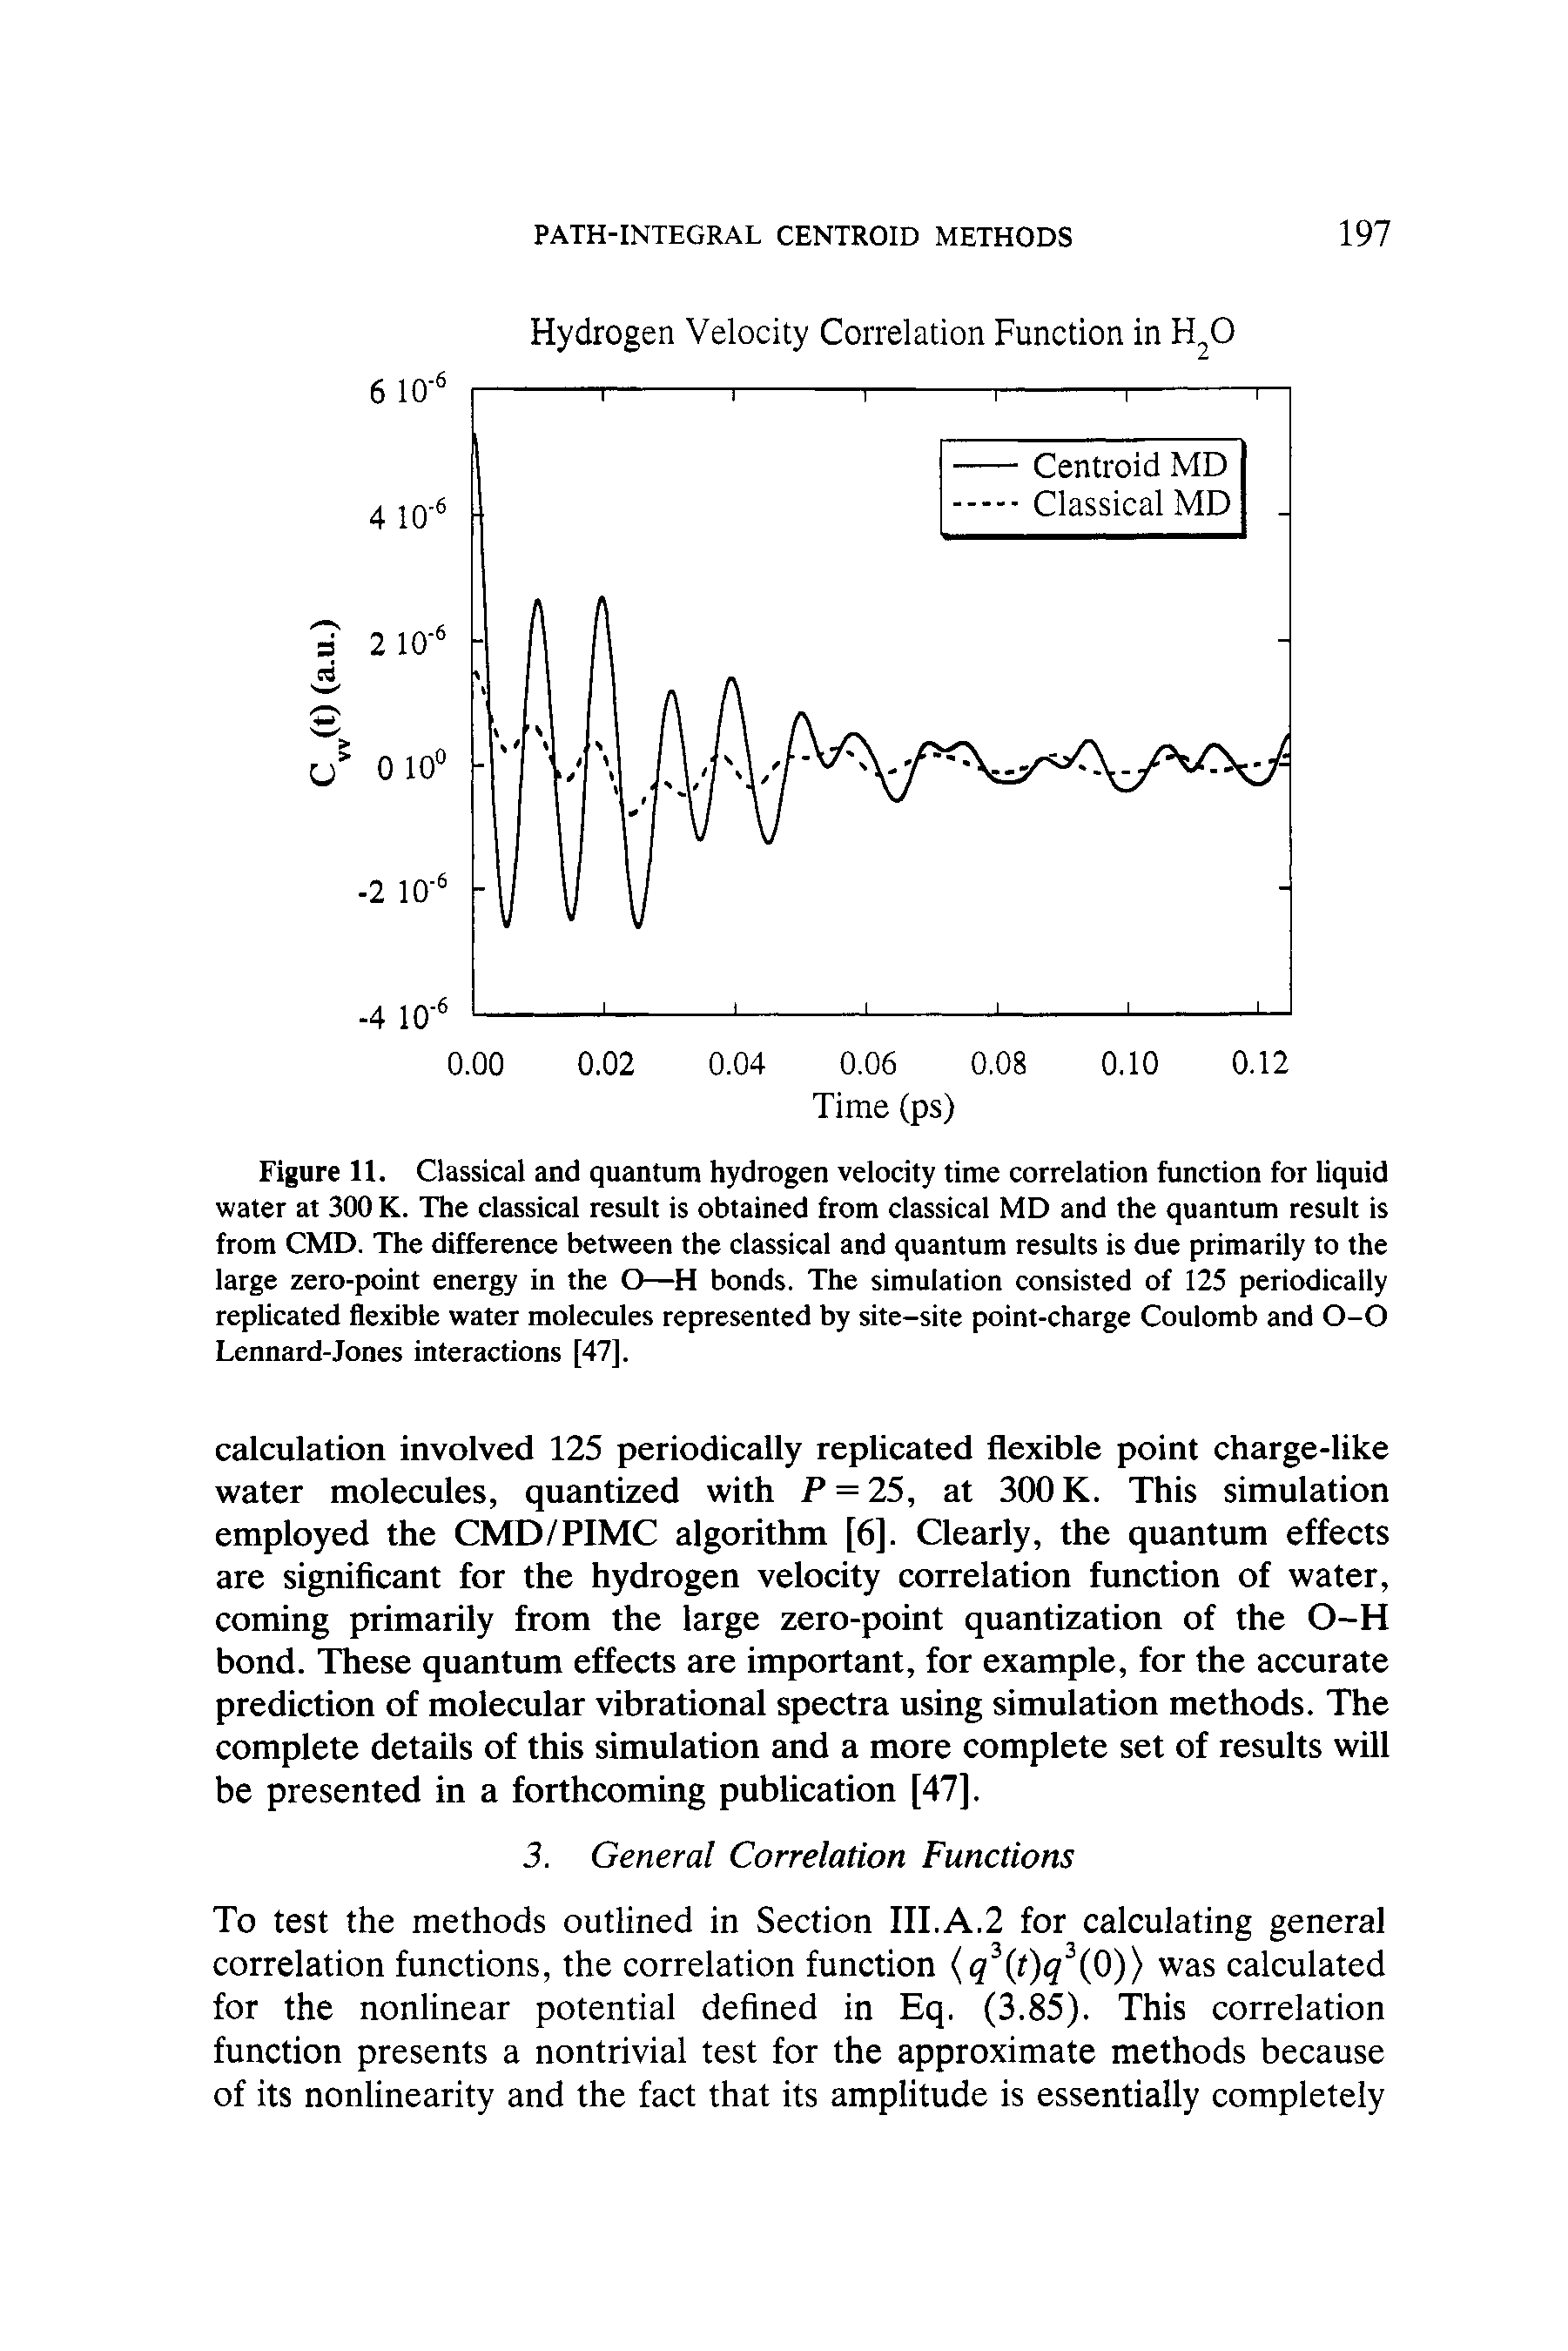 Figure 11. Classical and quantum hydrogen velocity time correlation function for liquid water at 300 K. The classical result is obtained from classical MD and the quantum result is from CMD. The difference between the classical and quantum results is due primarily to the large zero-point energy in the O—H bonds. The simulation consisted of 125 periodically replicated flexible water molecules represented by site-site point-charge Coulomb and 0-0 Lennard-Jones interactions [47],...